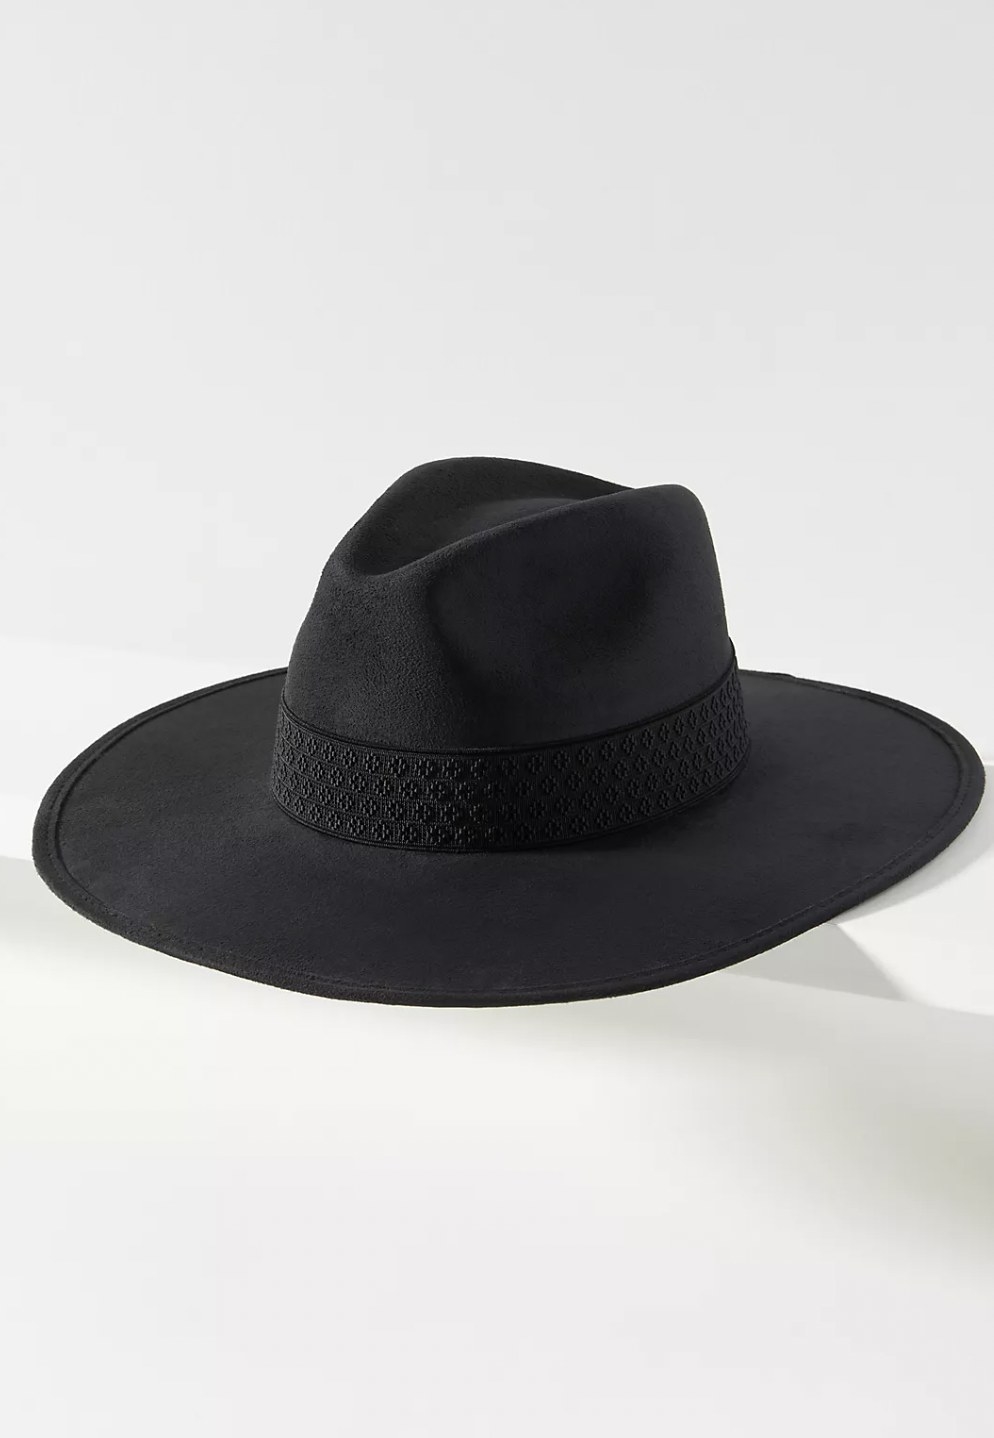 The black suede hat with diamond textured detailing on the brim